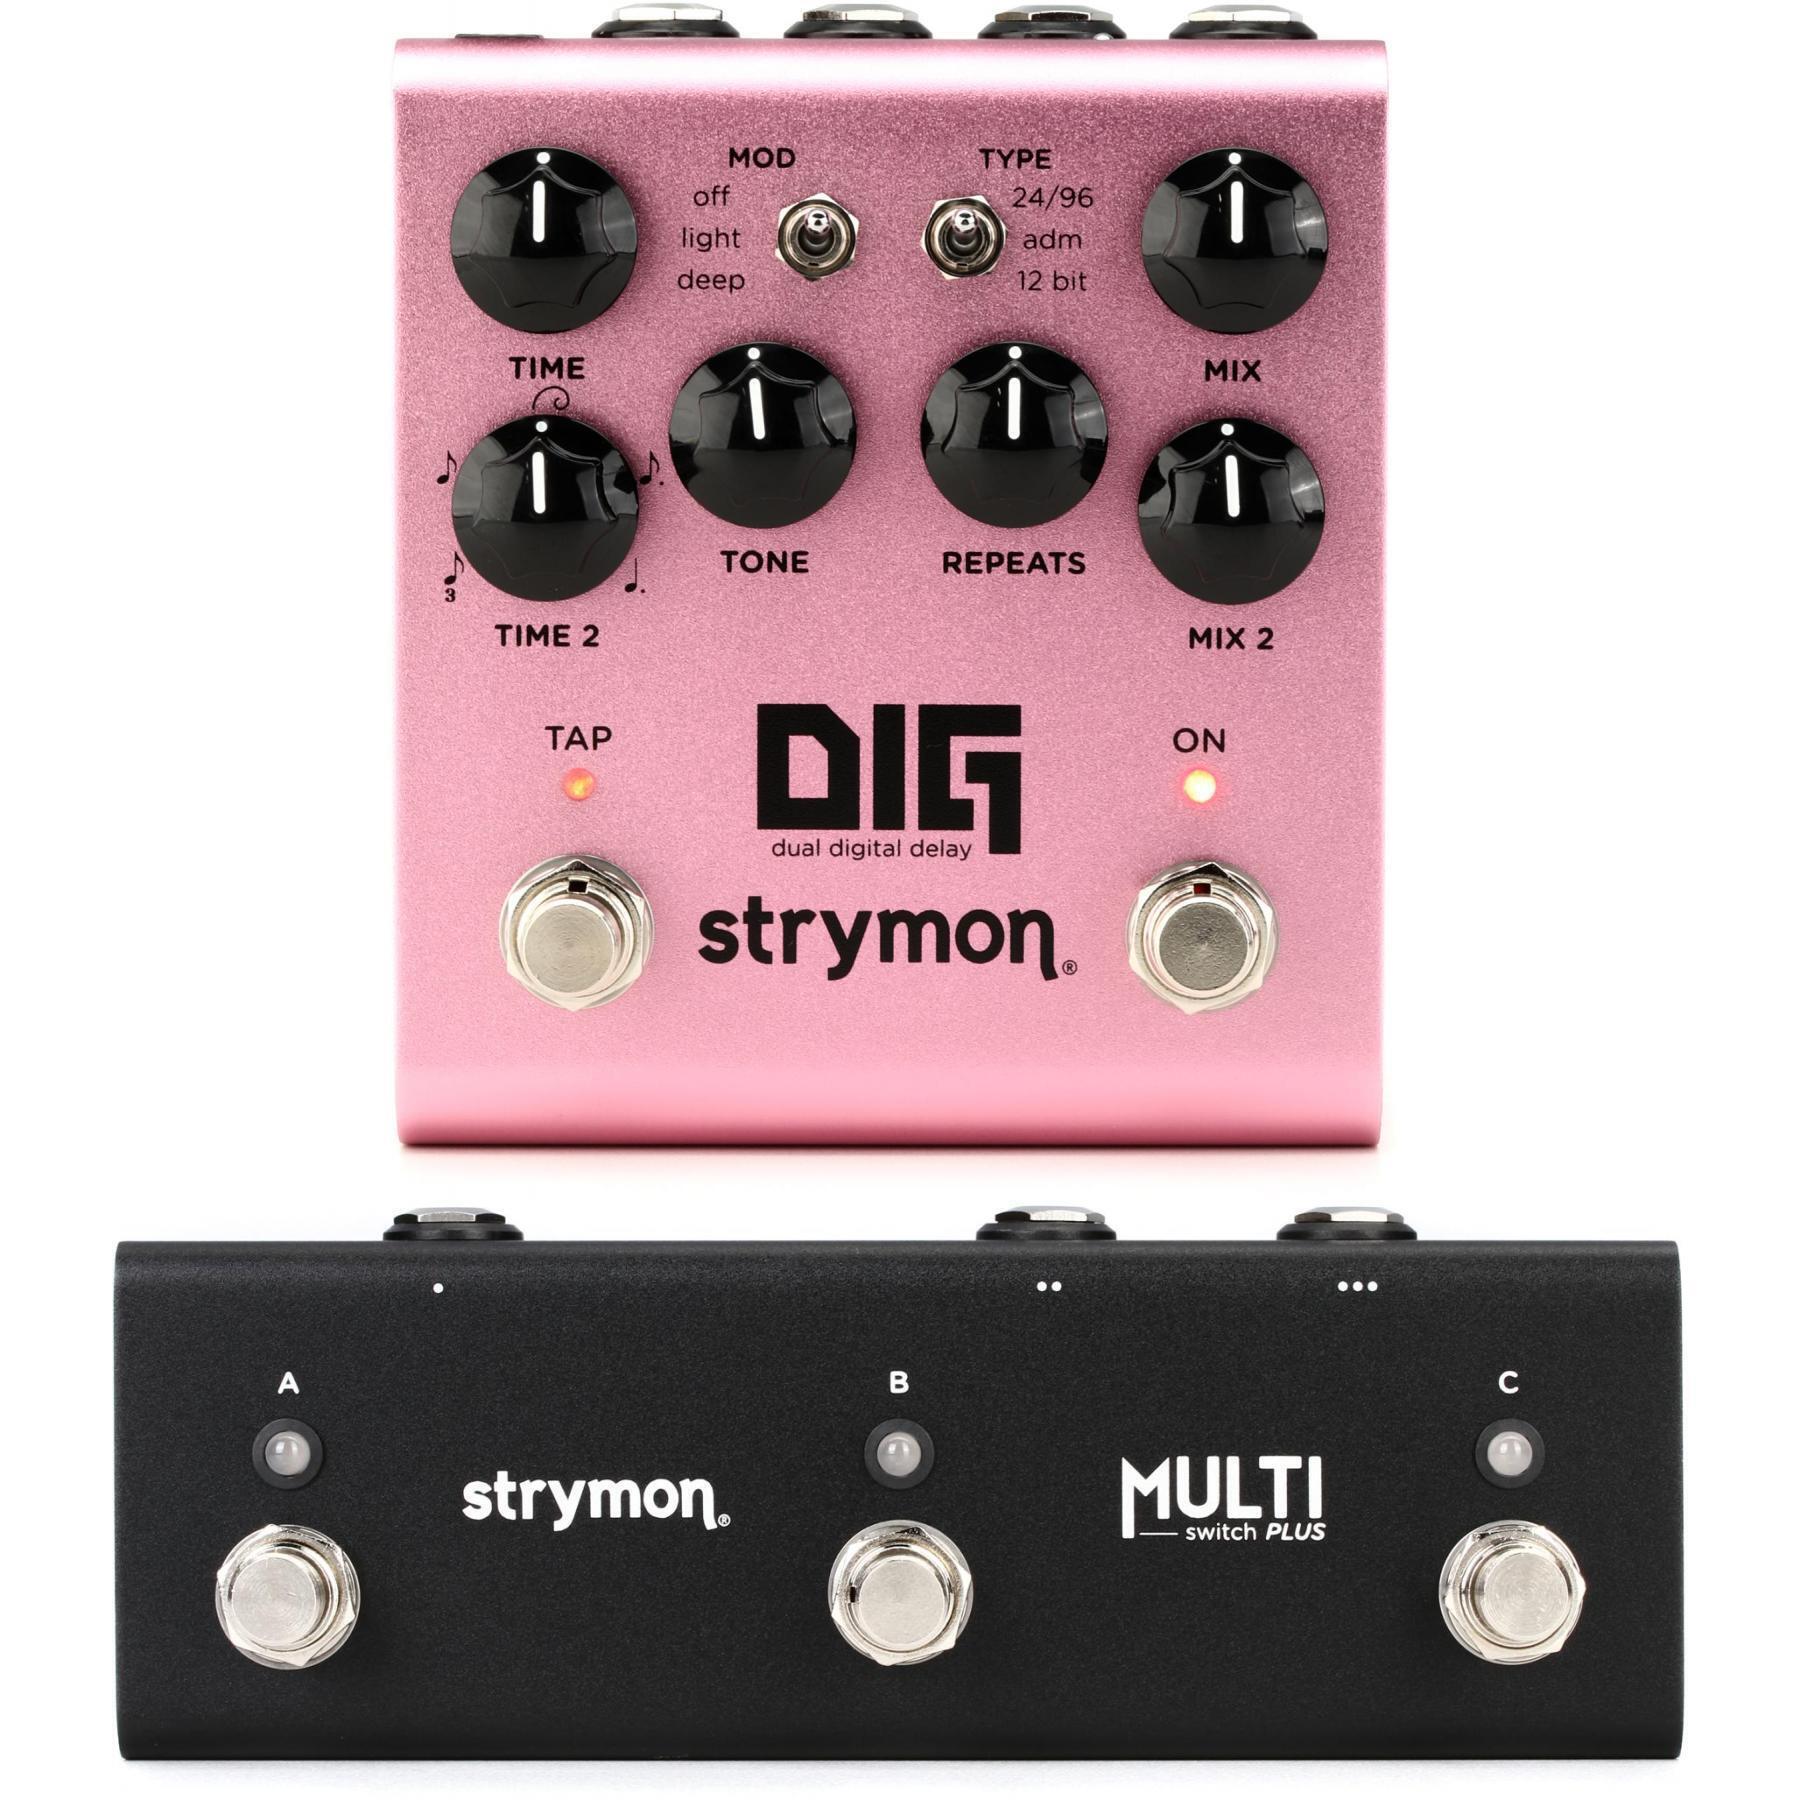 Strymon DIG Digital Delay Pedal V2 and Multi Switch Plus Pack